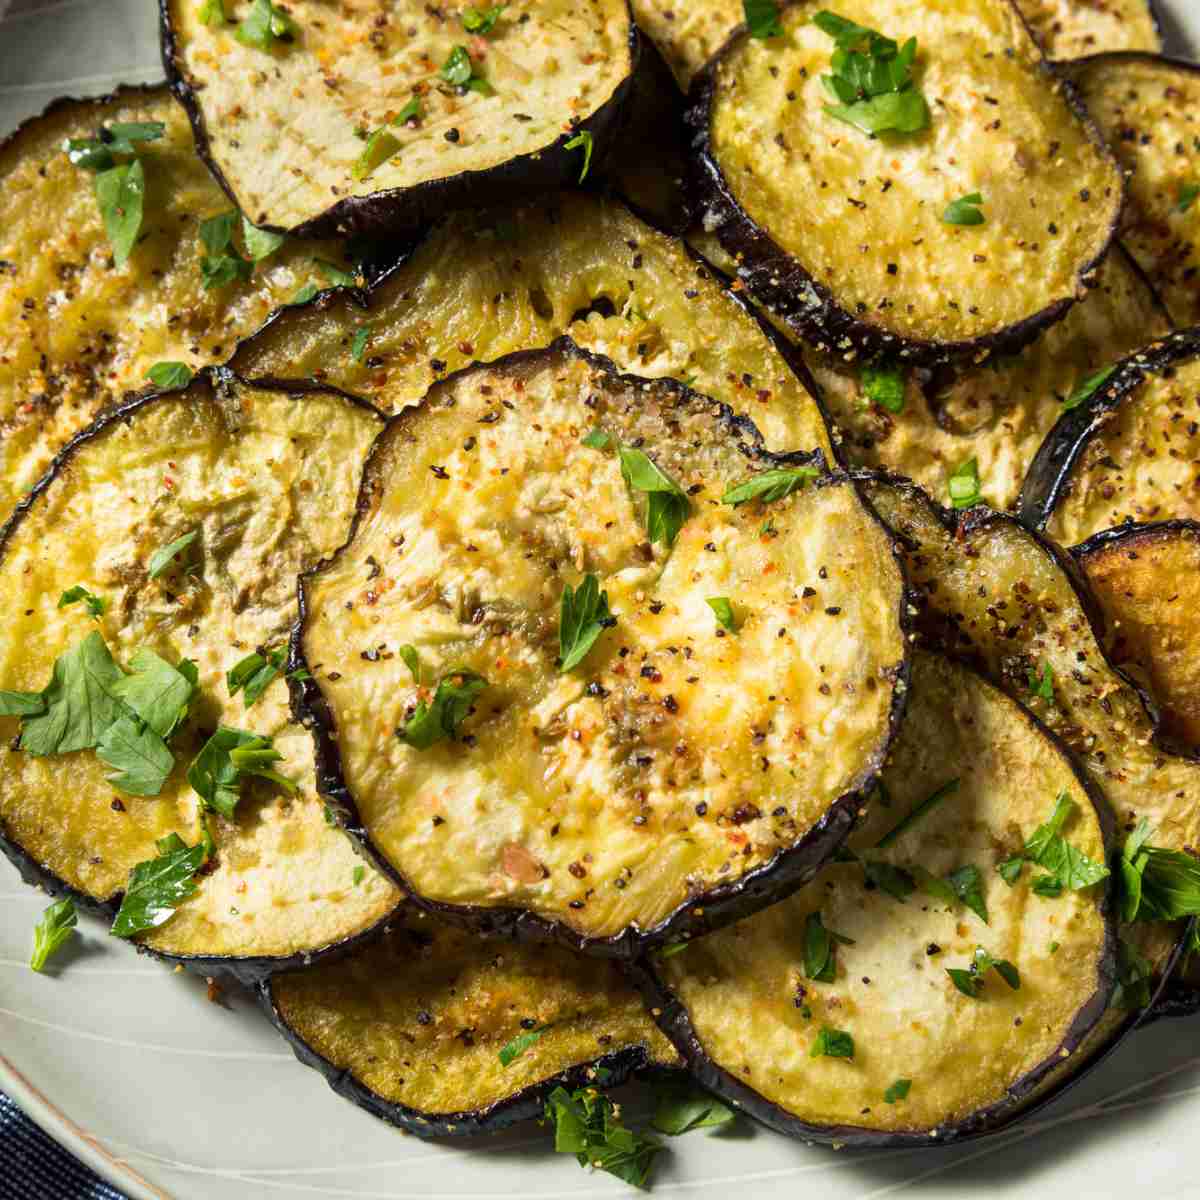 thinly sliced roasted eggplant rounds